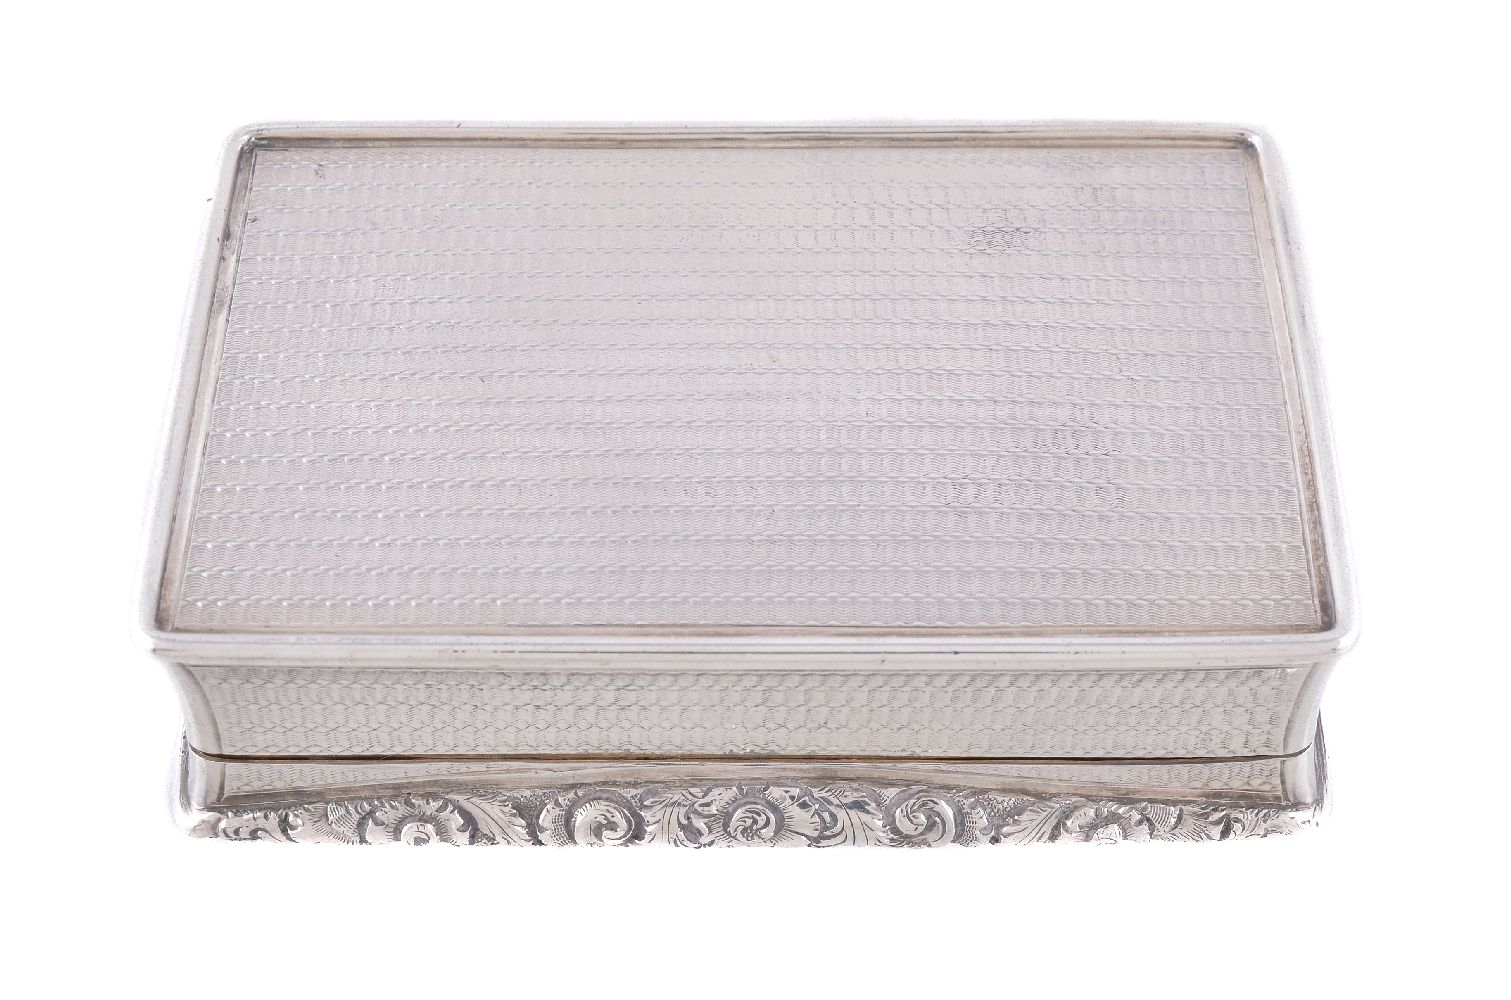 A William IV silver rectangular snuff box by Nathaniel Mills - Image 2 of 3